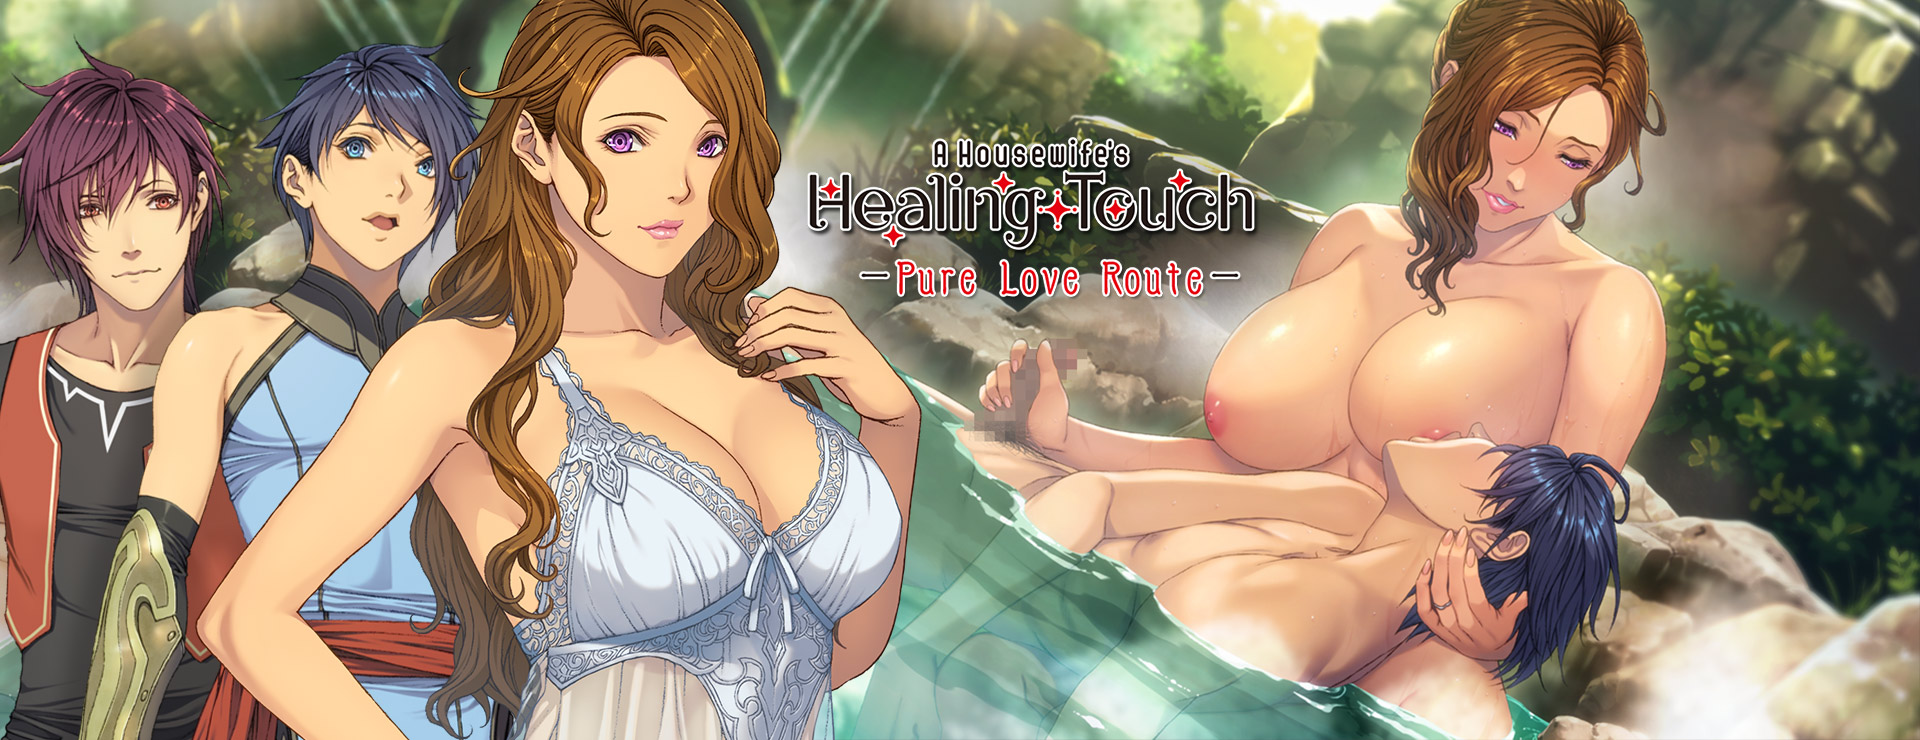 A Housewife's Healing Touch (Pure Love Route) - Action Adventure Game